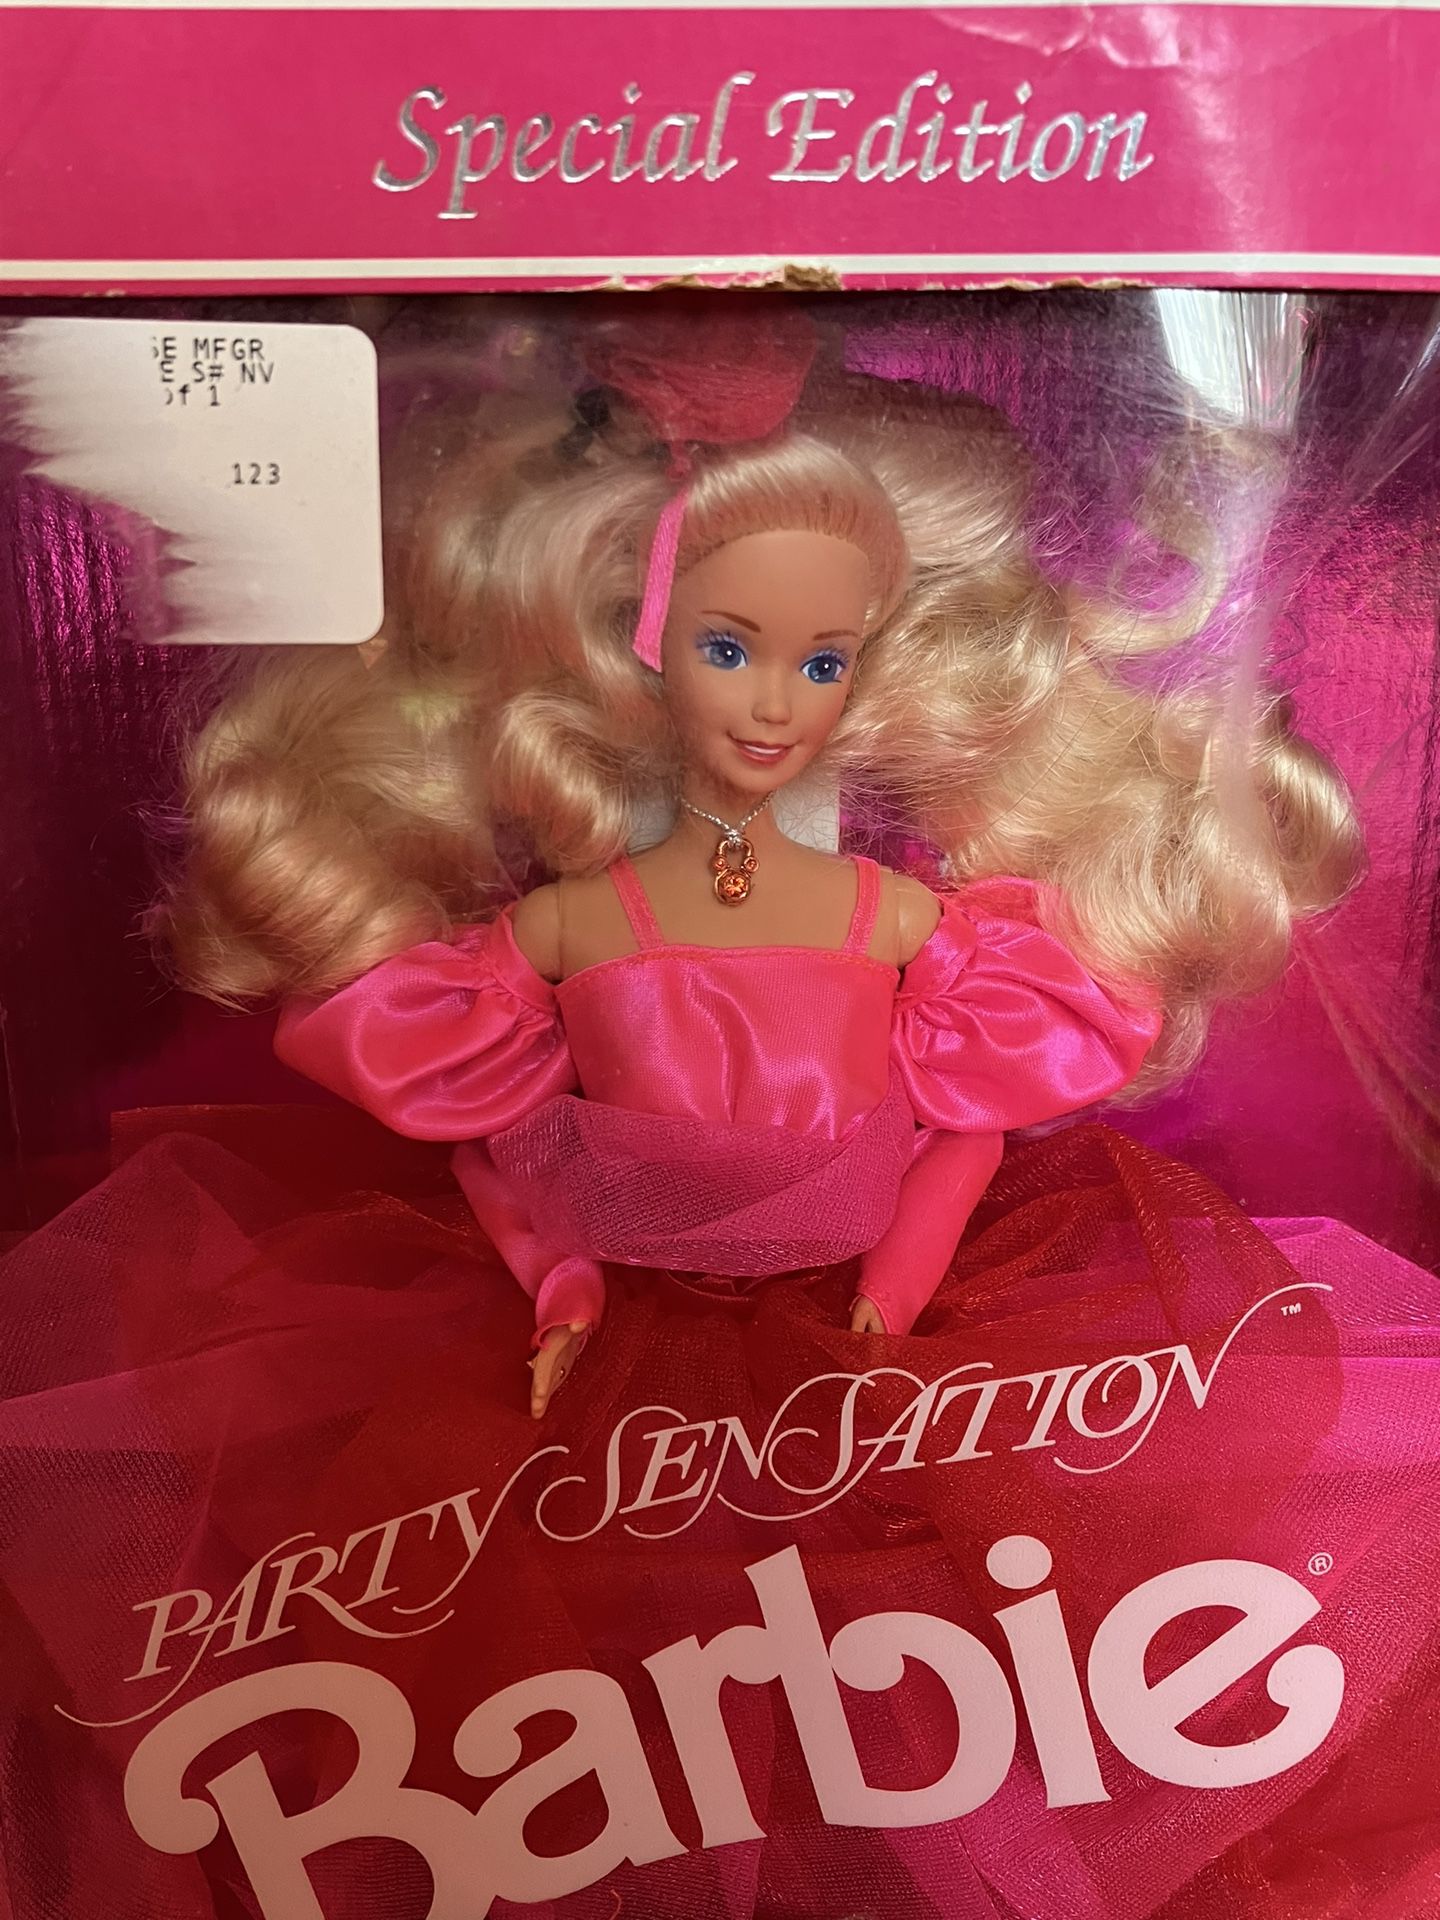 NEW Vintage BARBIE DOLL PARTY SENSATION SPECIAL EDITION ‼️ BOX DAMAGED ‼️ Price Is FIRM ‼️ See HUGE Collection ALL MUST GO ‼️ See Pictures ..